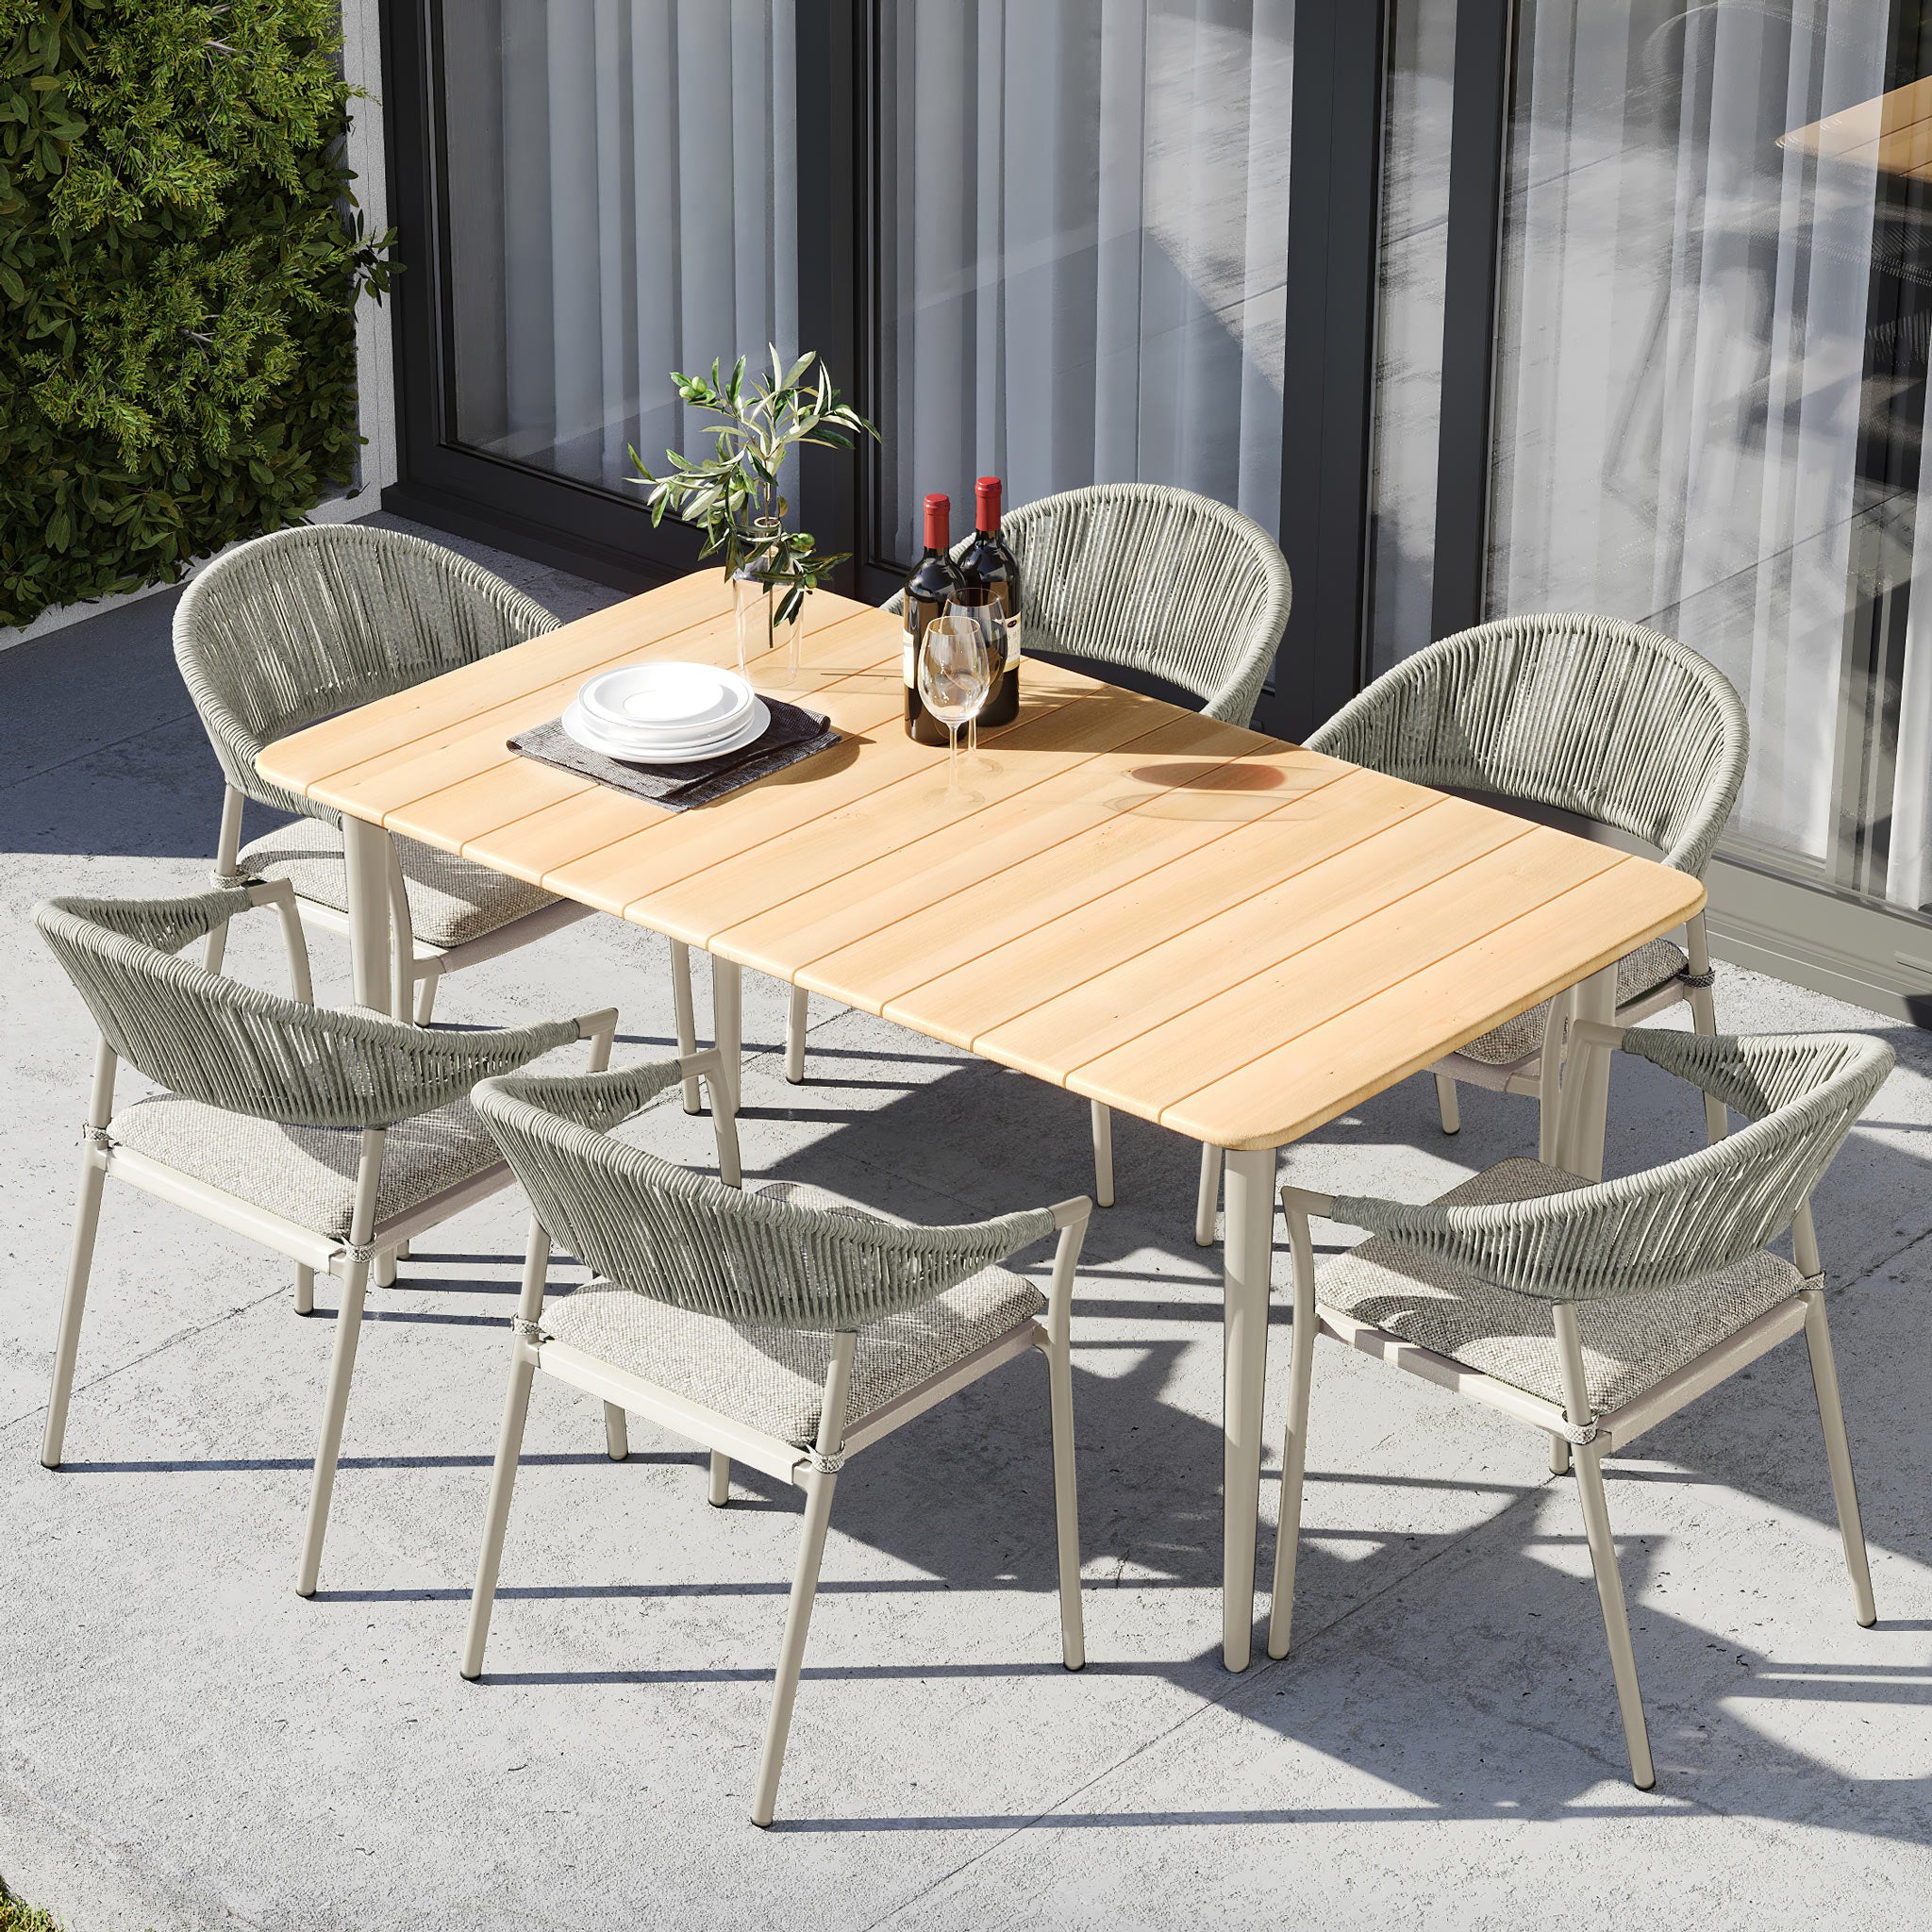 Cloverly 6 Seat Rectangular Dining with Teak Table in Latte